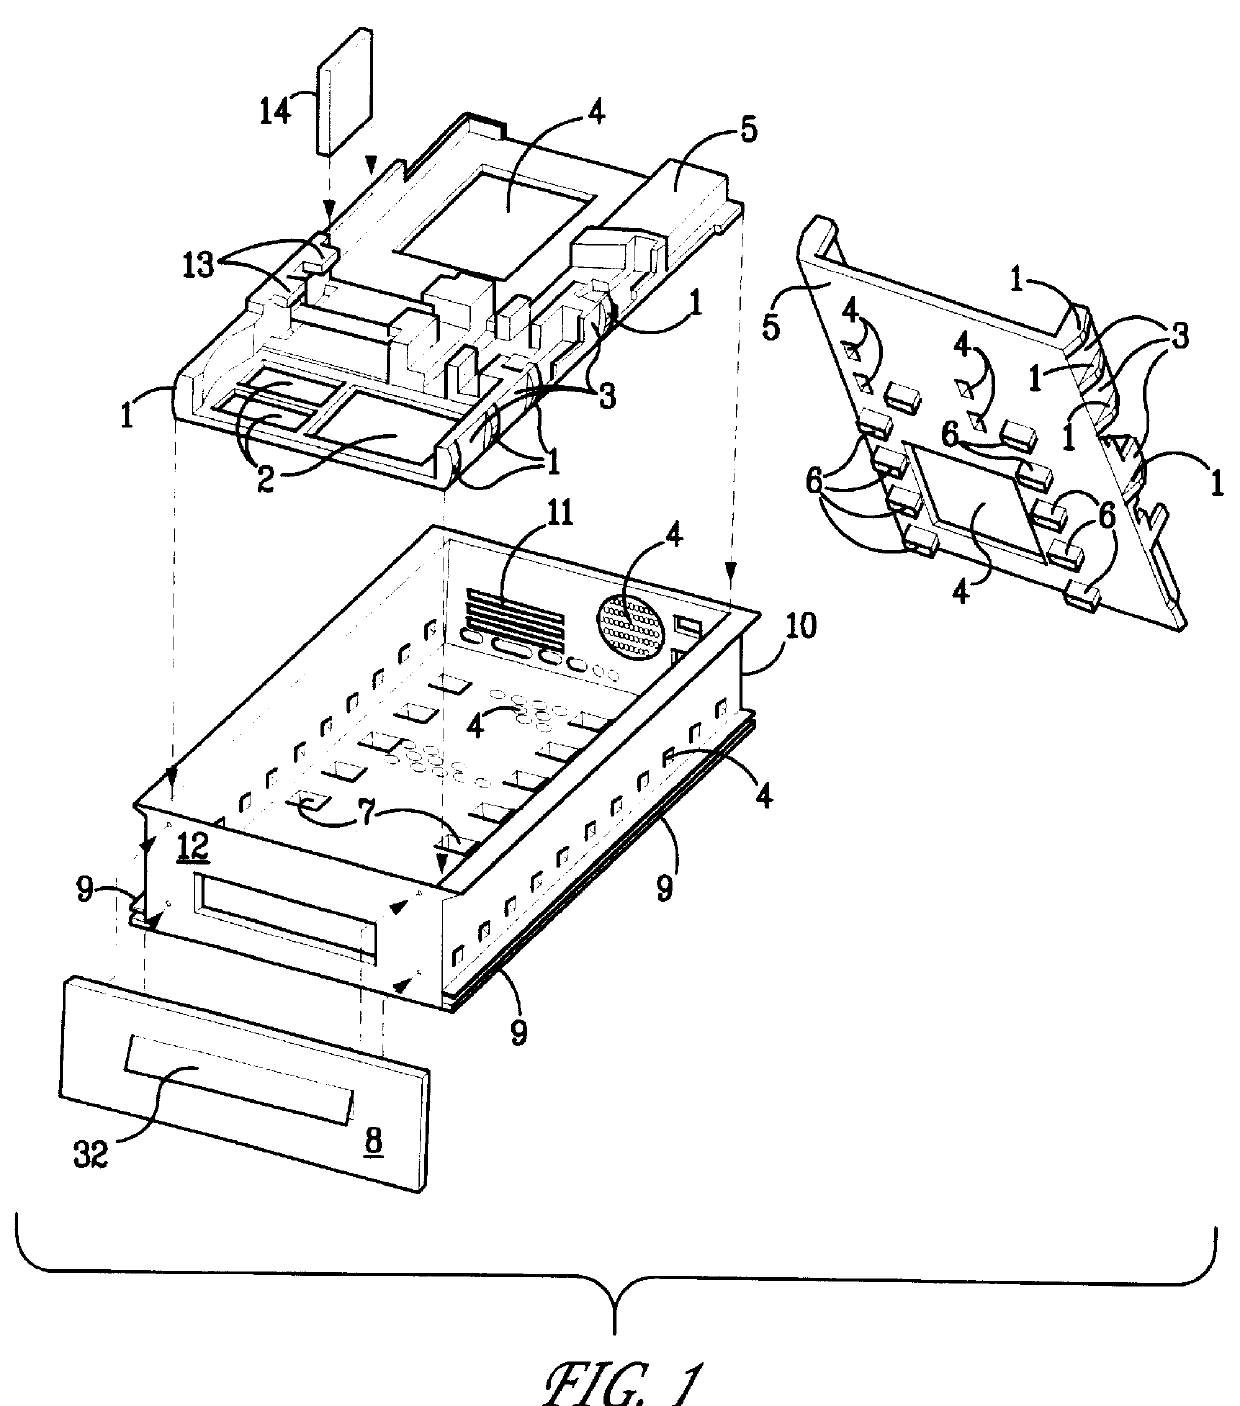 Component housing for integration with furniture